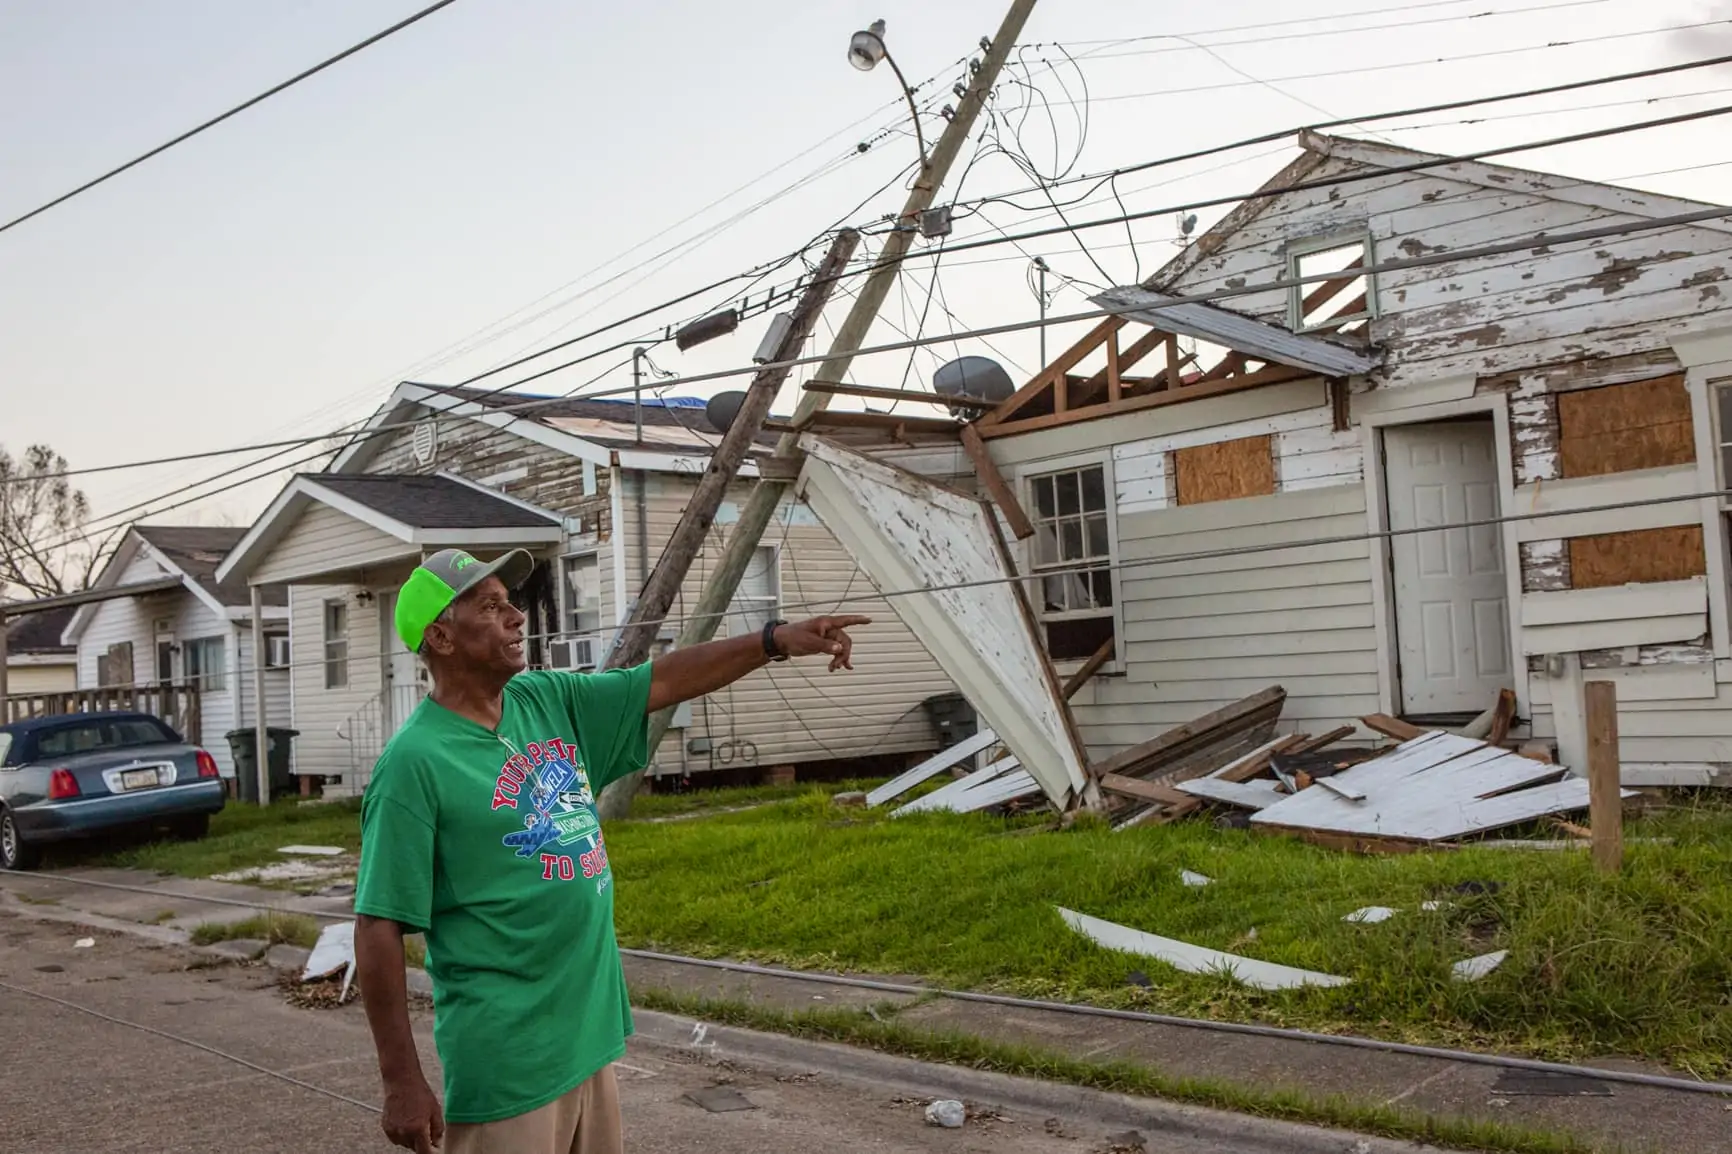 Michael H. Captain Sr. points to the damage created by Hurricane Laura on his street with damaged houses and a down telephone pole behind him.